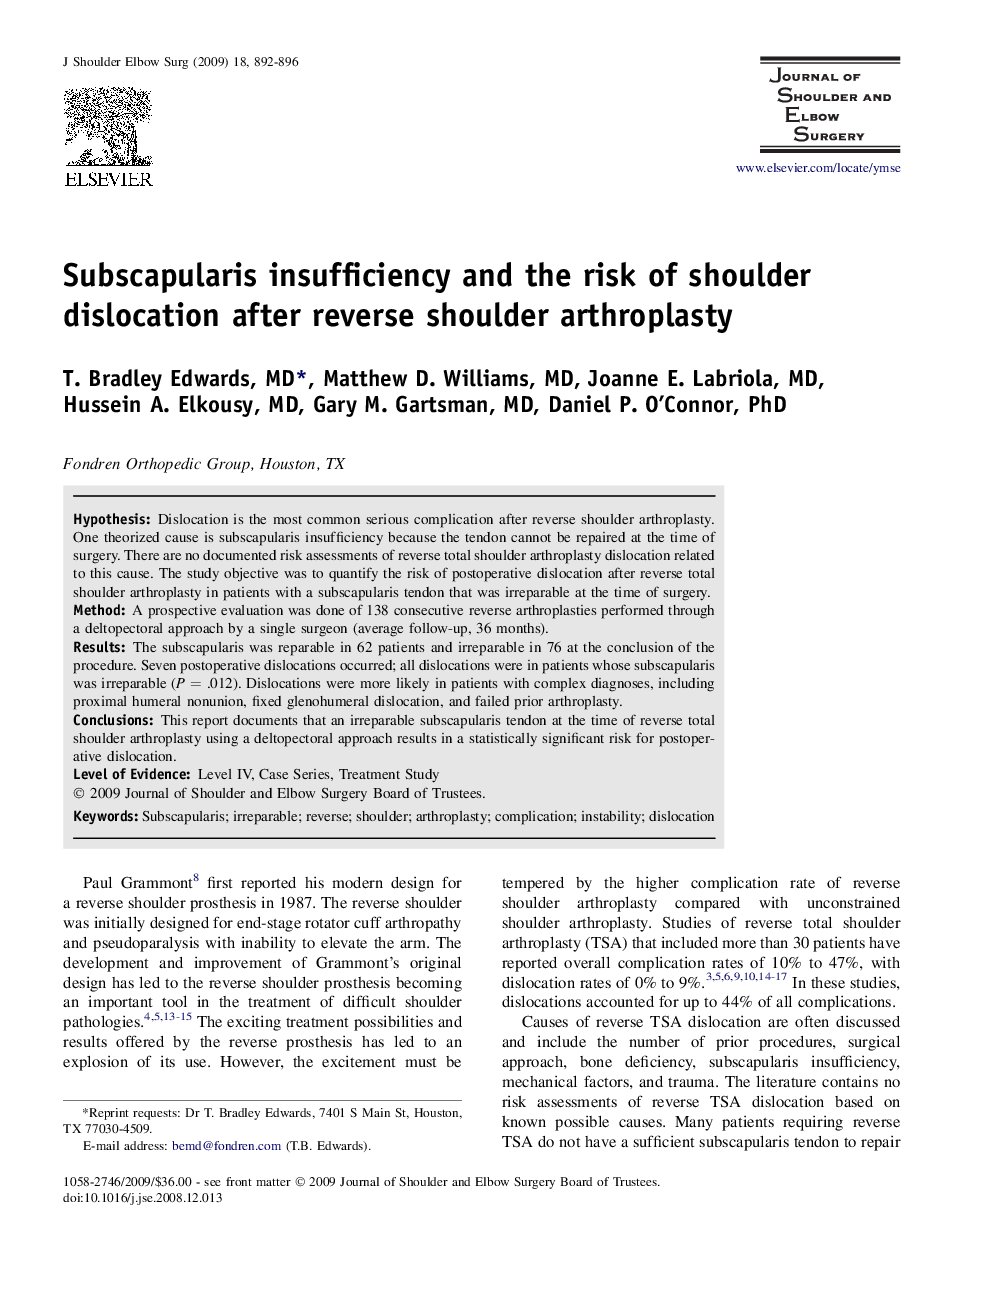 Subscapularis insufficiency and the risk of shoulder dislocation after reverse shoulder arthroplasty